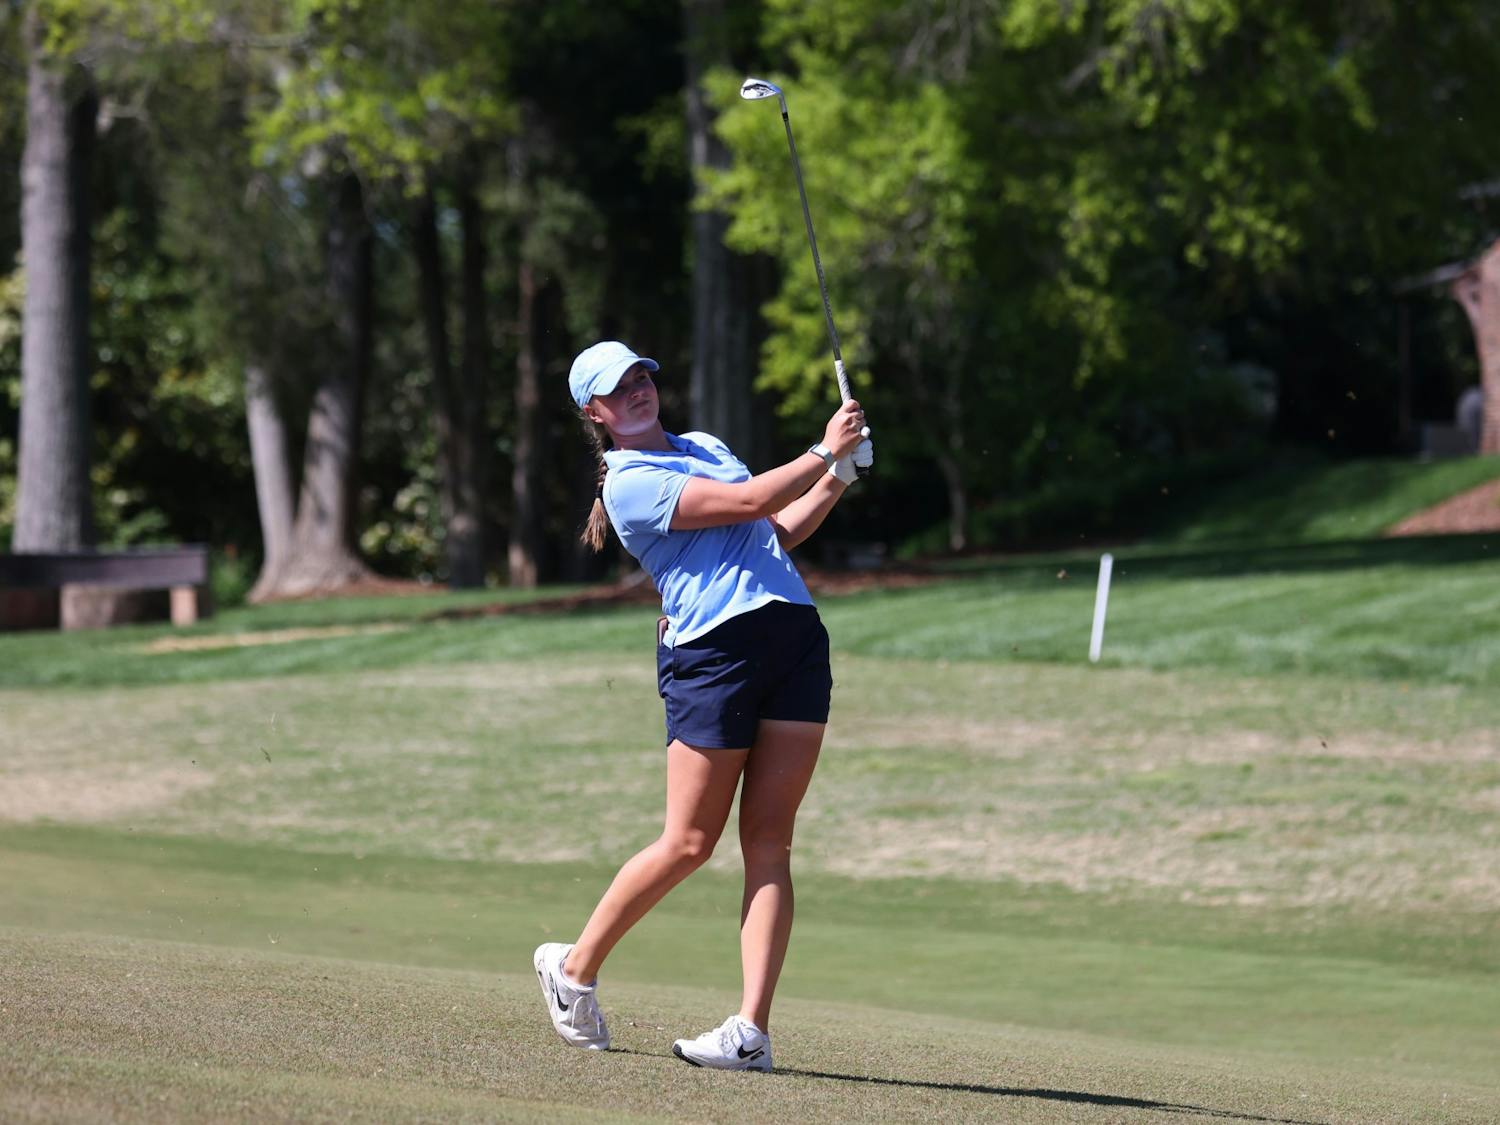 UNC first-year Megan Streicher swings her golf club during the 2023 ACC Women's Golf Championship at Sedgefield Country Club in Greensboro, North Carolina, on April 13, 2023. 
Photo Courtesy of Andy Mead/YCJ.